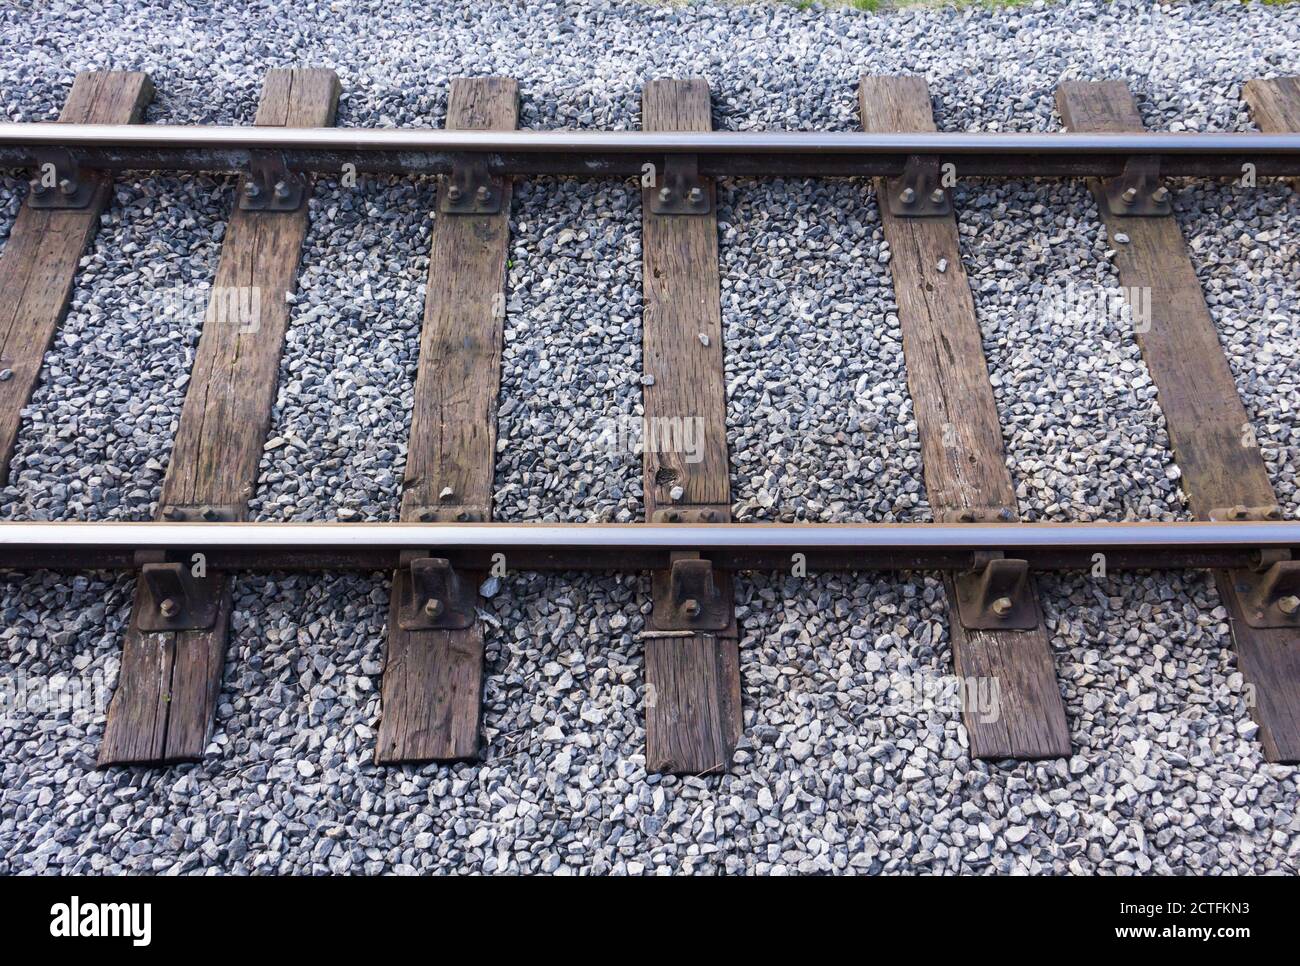 Wood sleeper, ballasted railway track, close up. Part of section of double track at the Damems passing loop on the Keighl;ey and Worth Valley Railway. Stock Photo